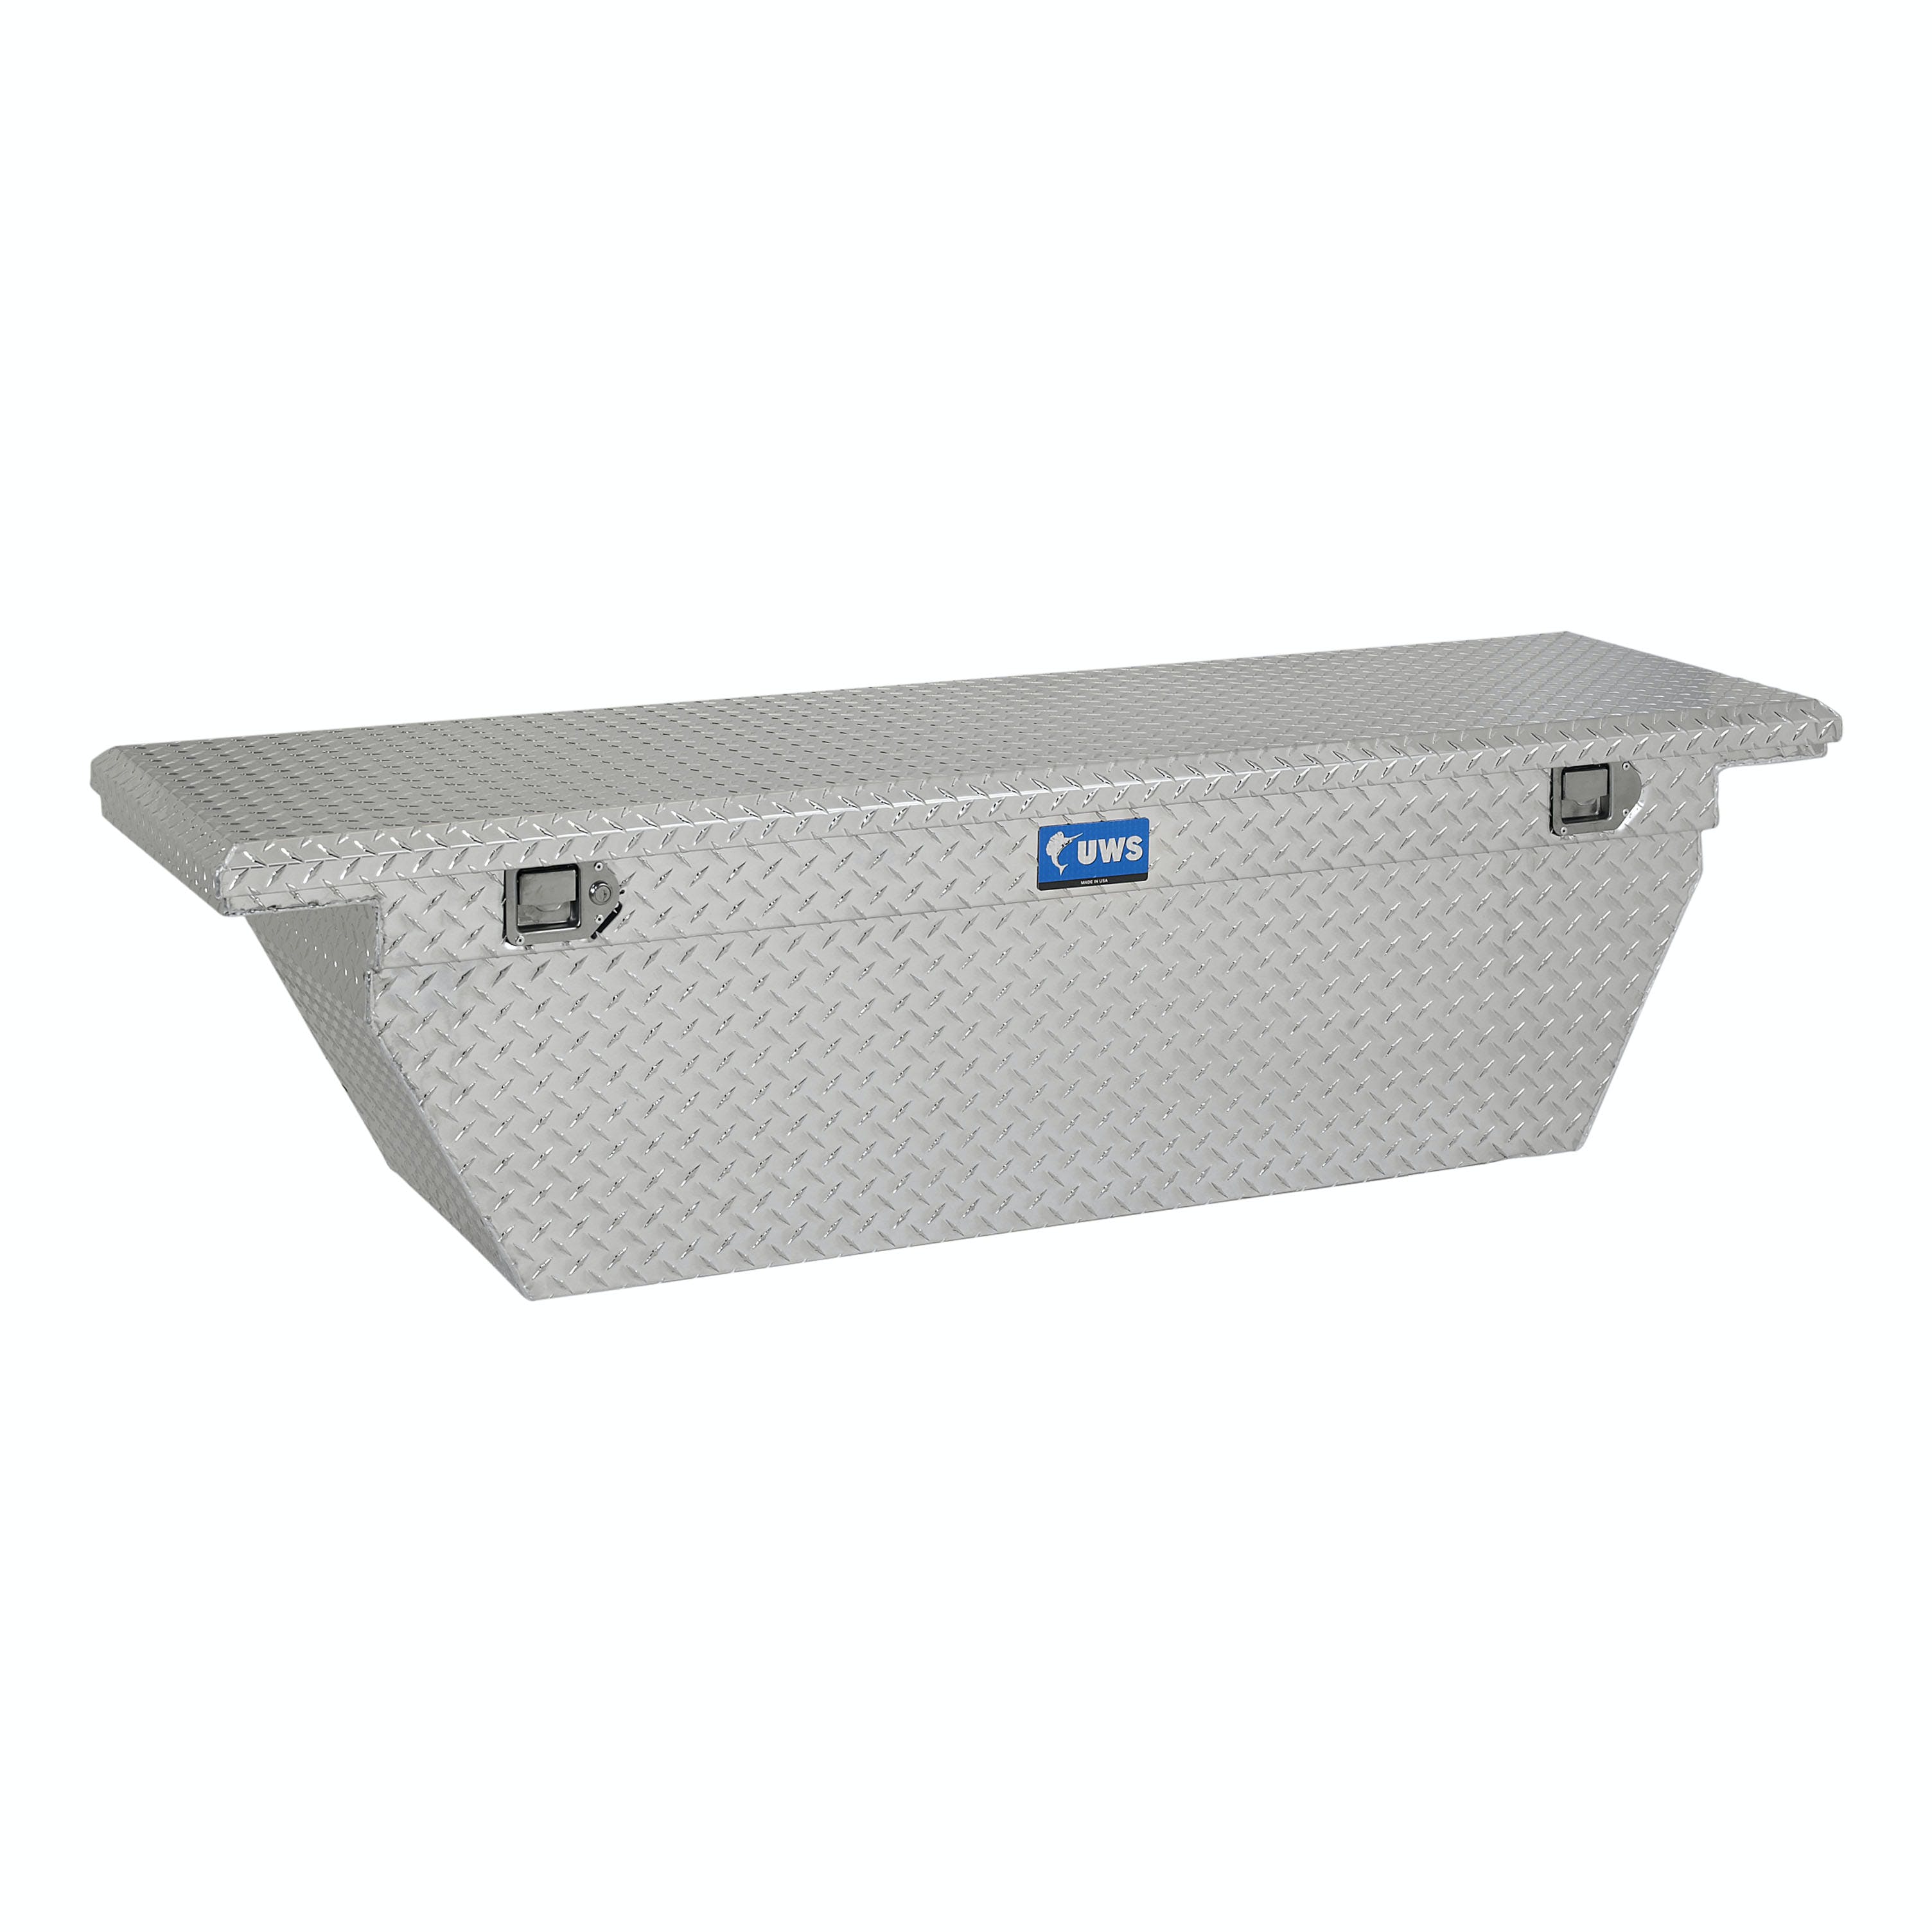 UWS TBSD-69-A-LP 69 inch Aluminum Single Lid Crossover Toolbox Deep Low Profile Angled